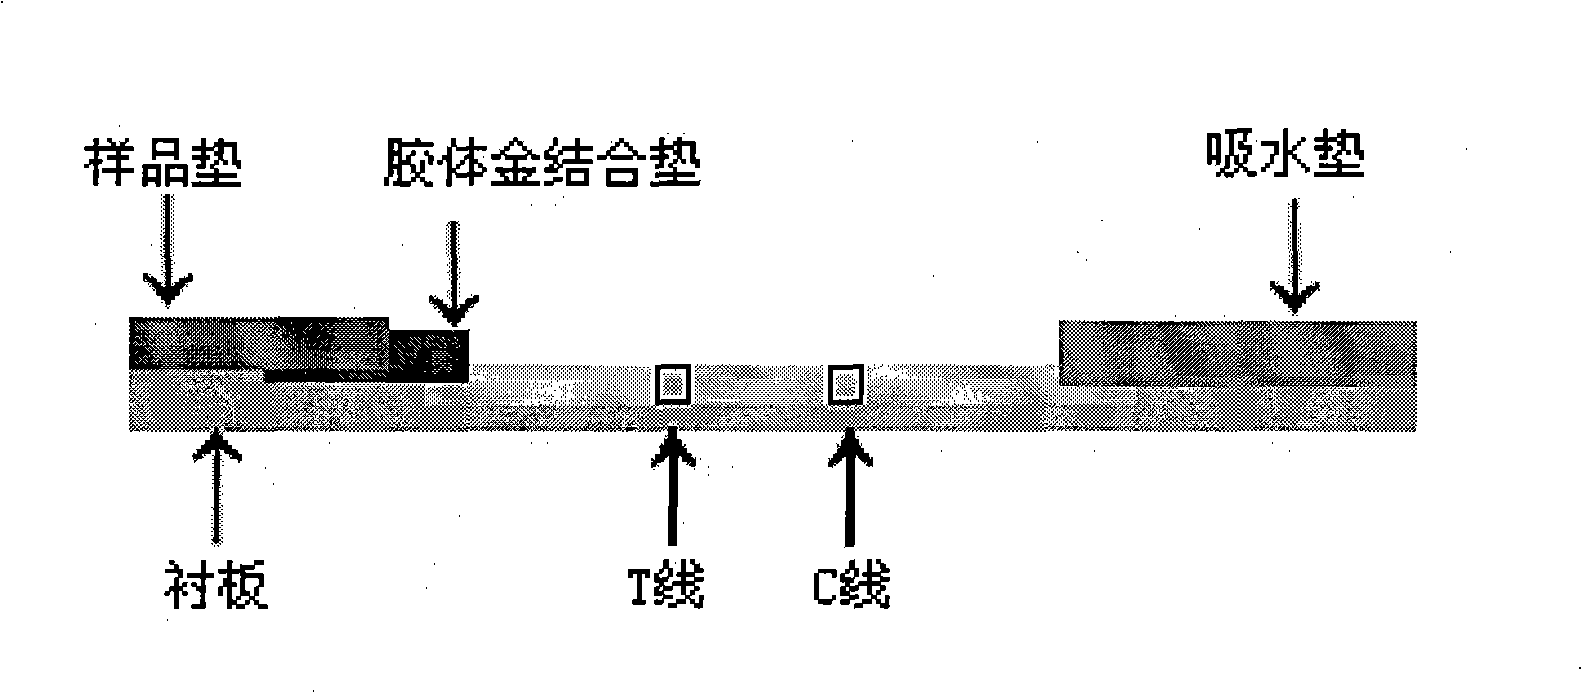 Preparation method of colloidal gold chromatography test paper for fast detecting urolong metabolite